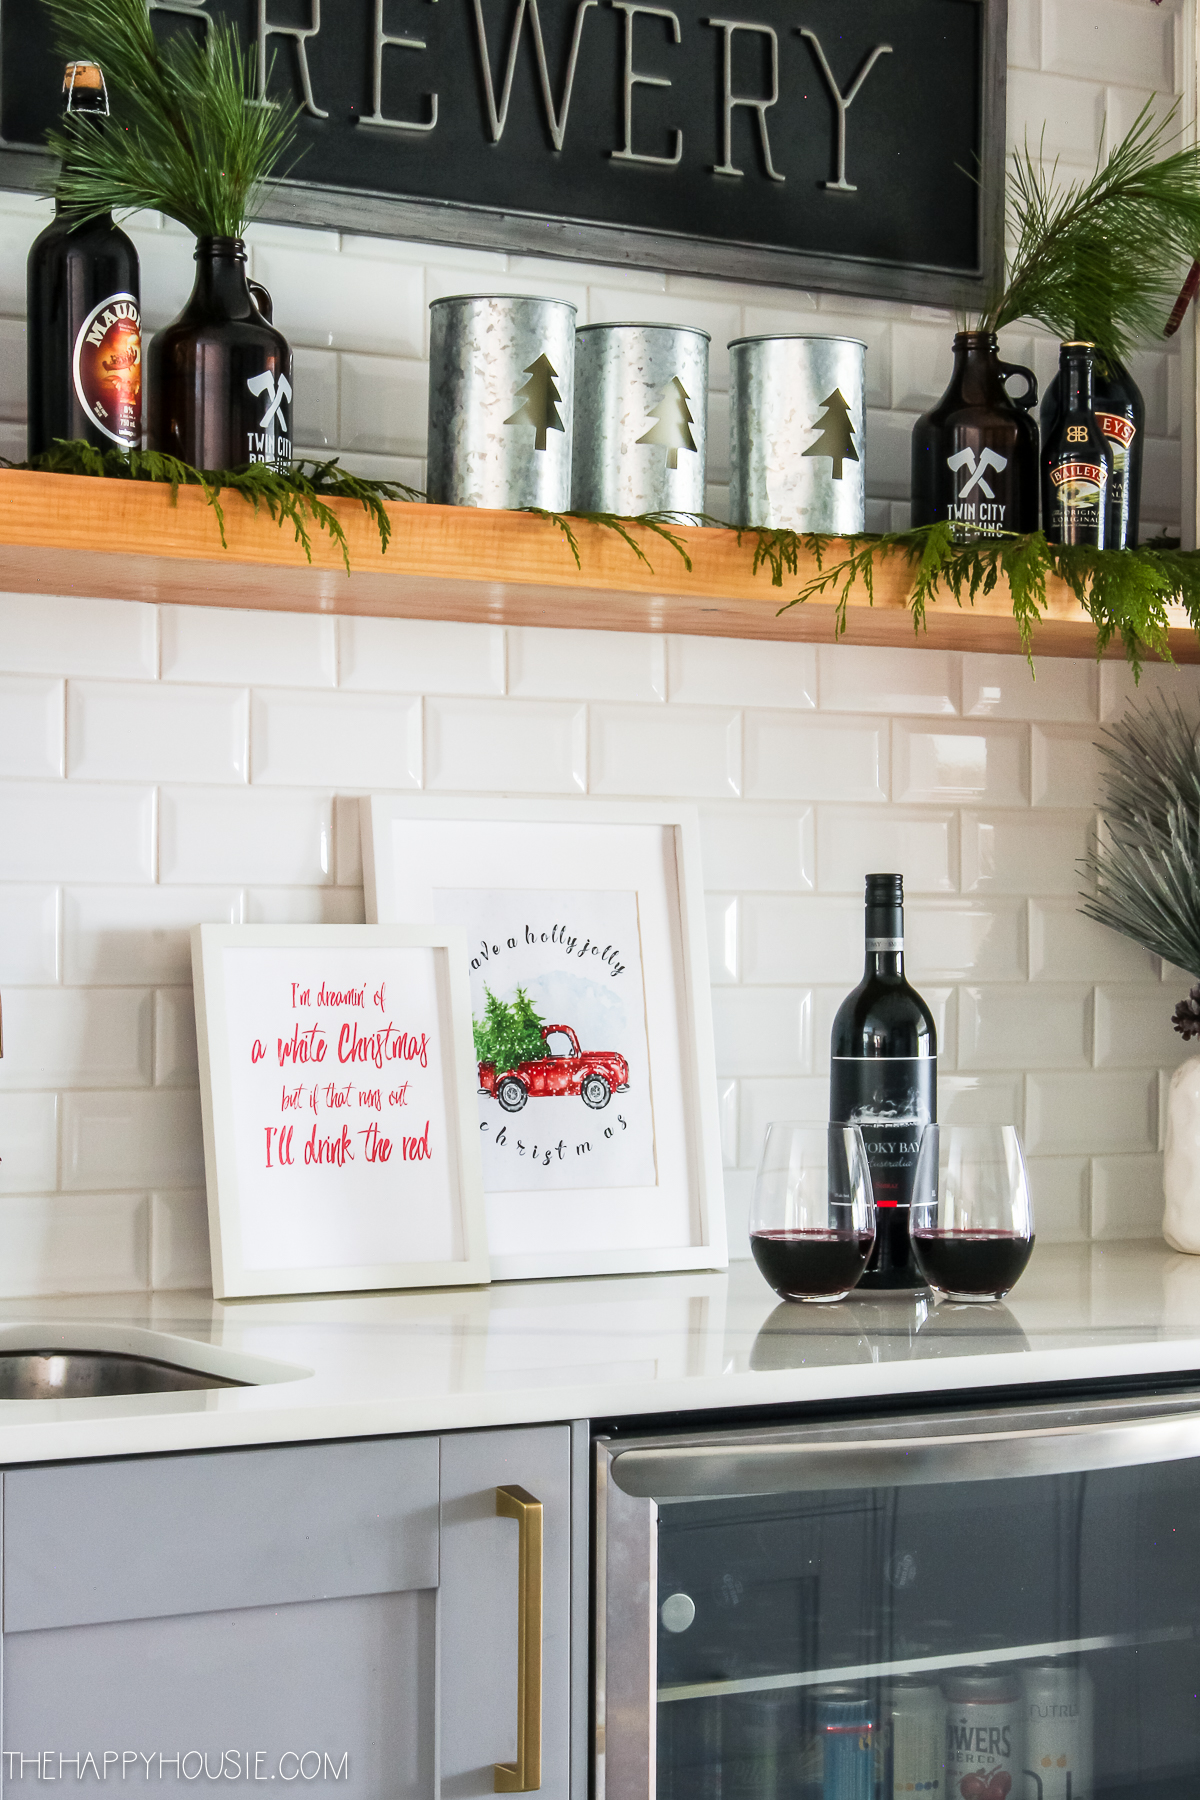 A bottle of red wine with two glasses is on the counter in the kitchen.